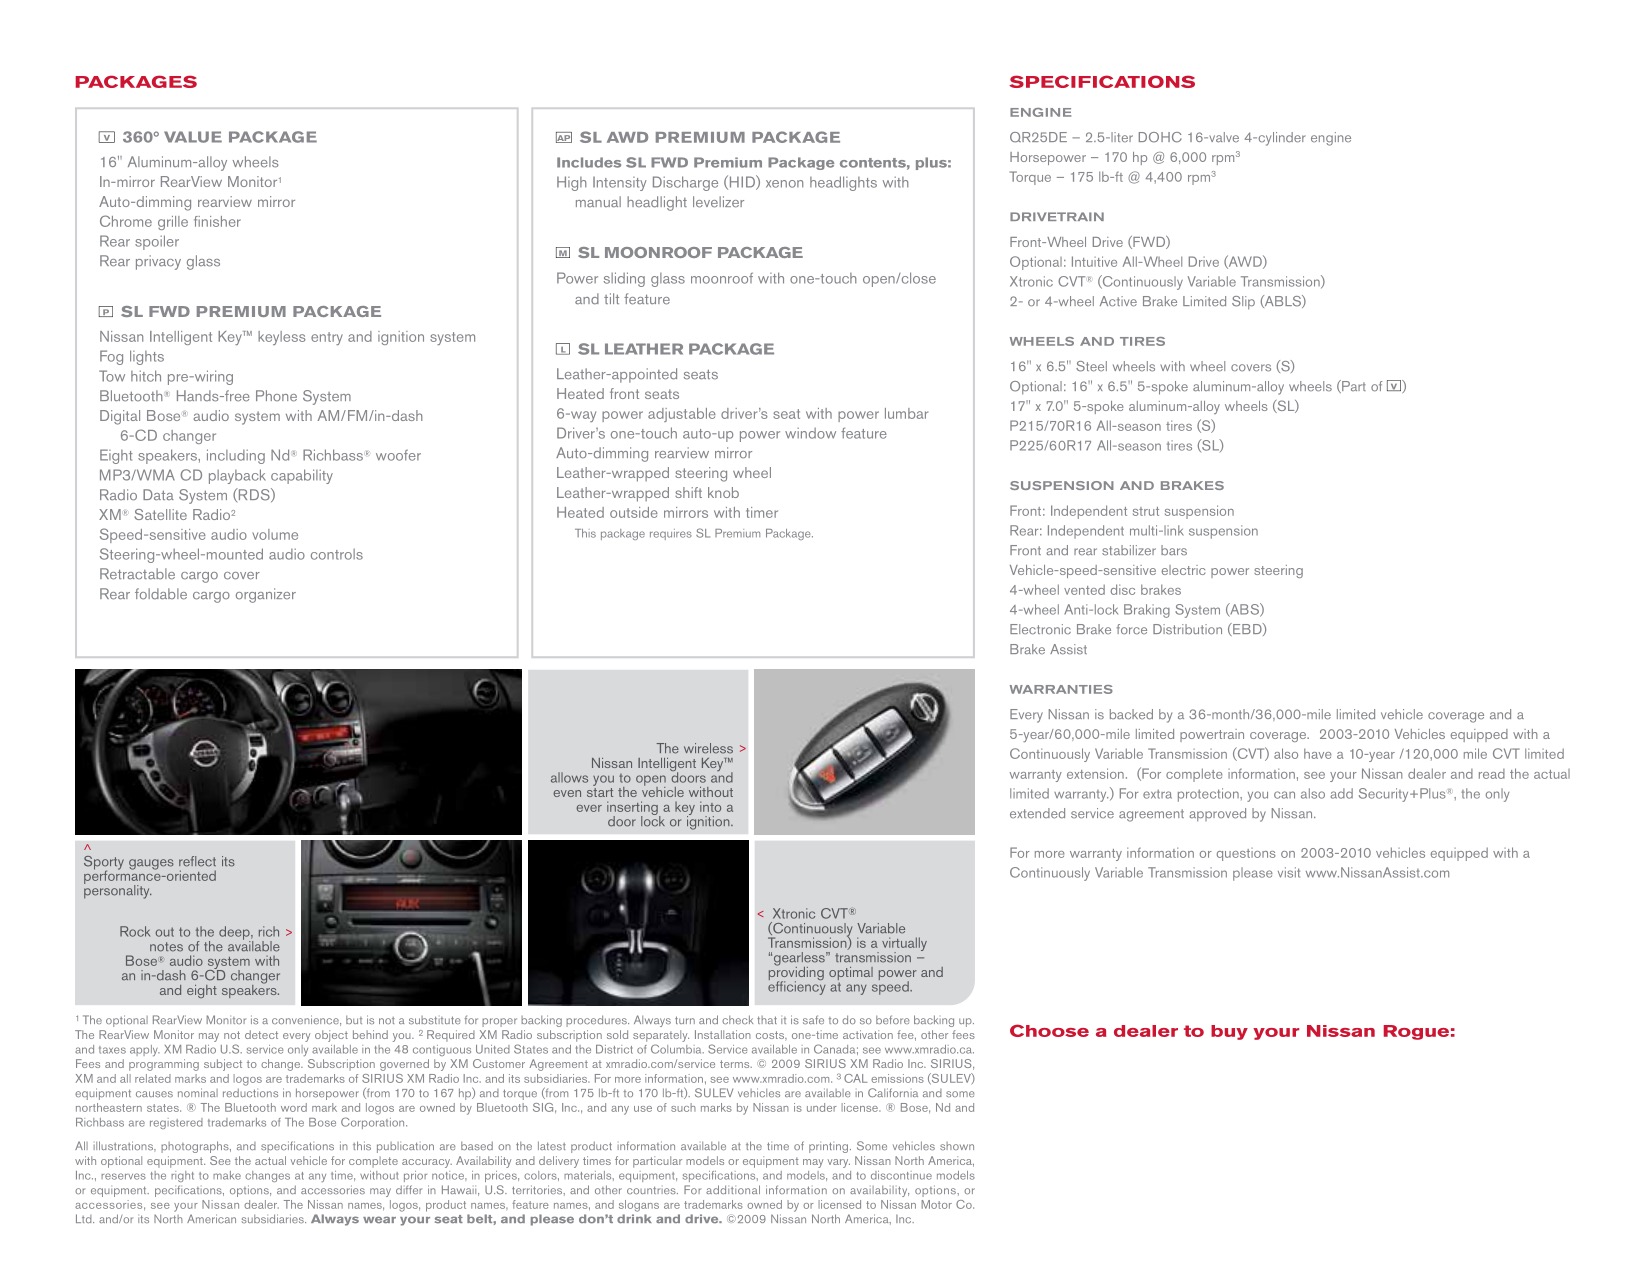 2010 Nissan Rogue Brochure Page 3